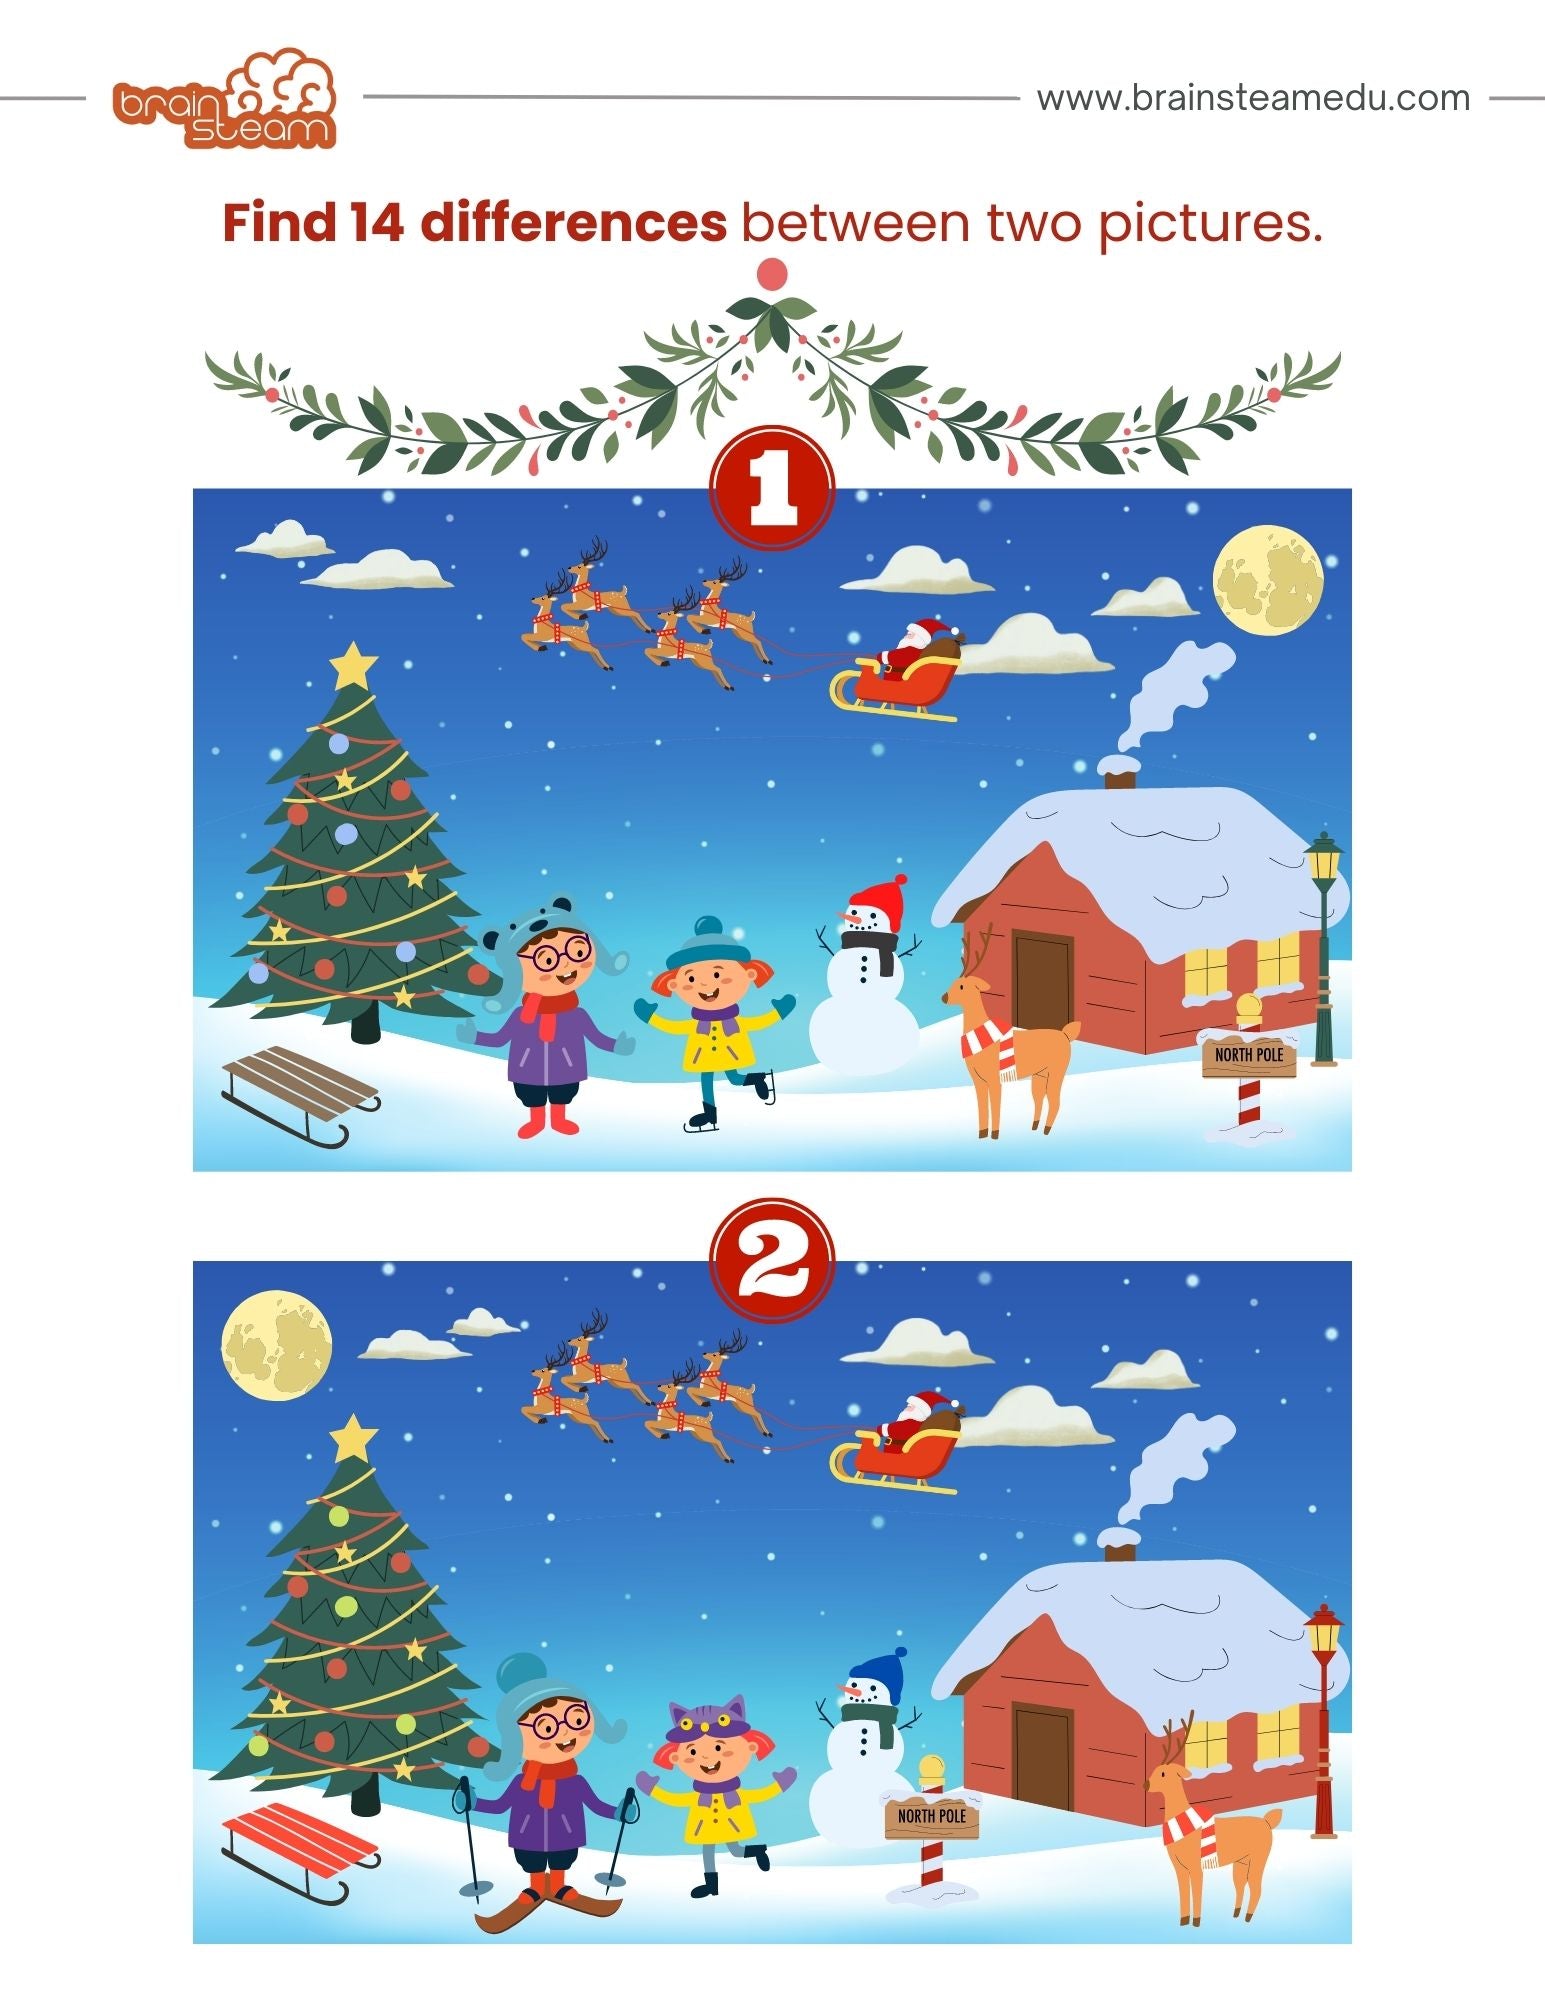 find_14_differences-christmas-brainsteam